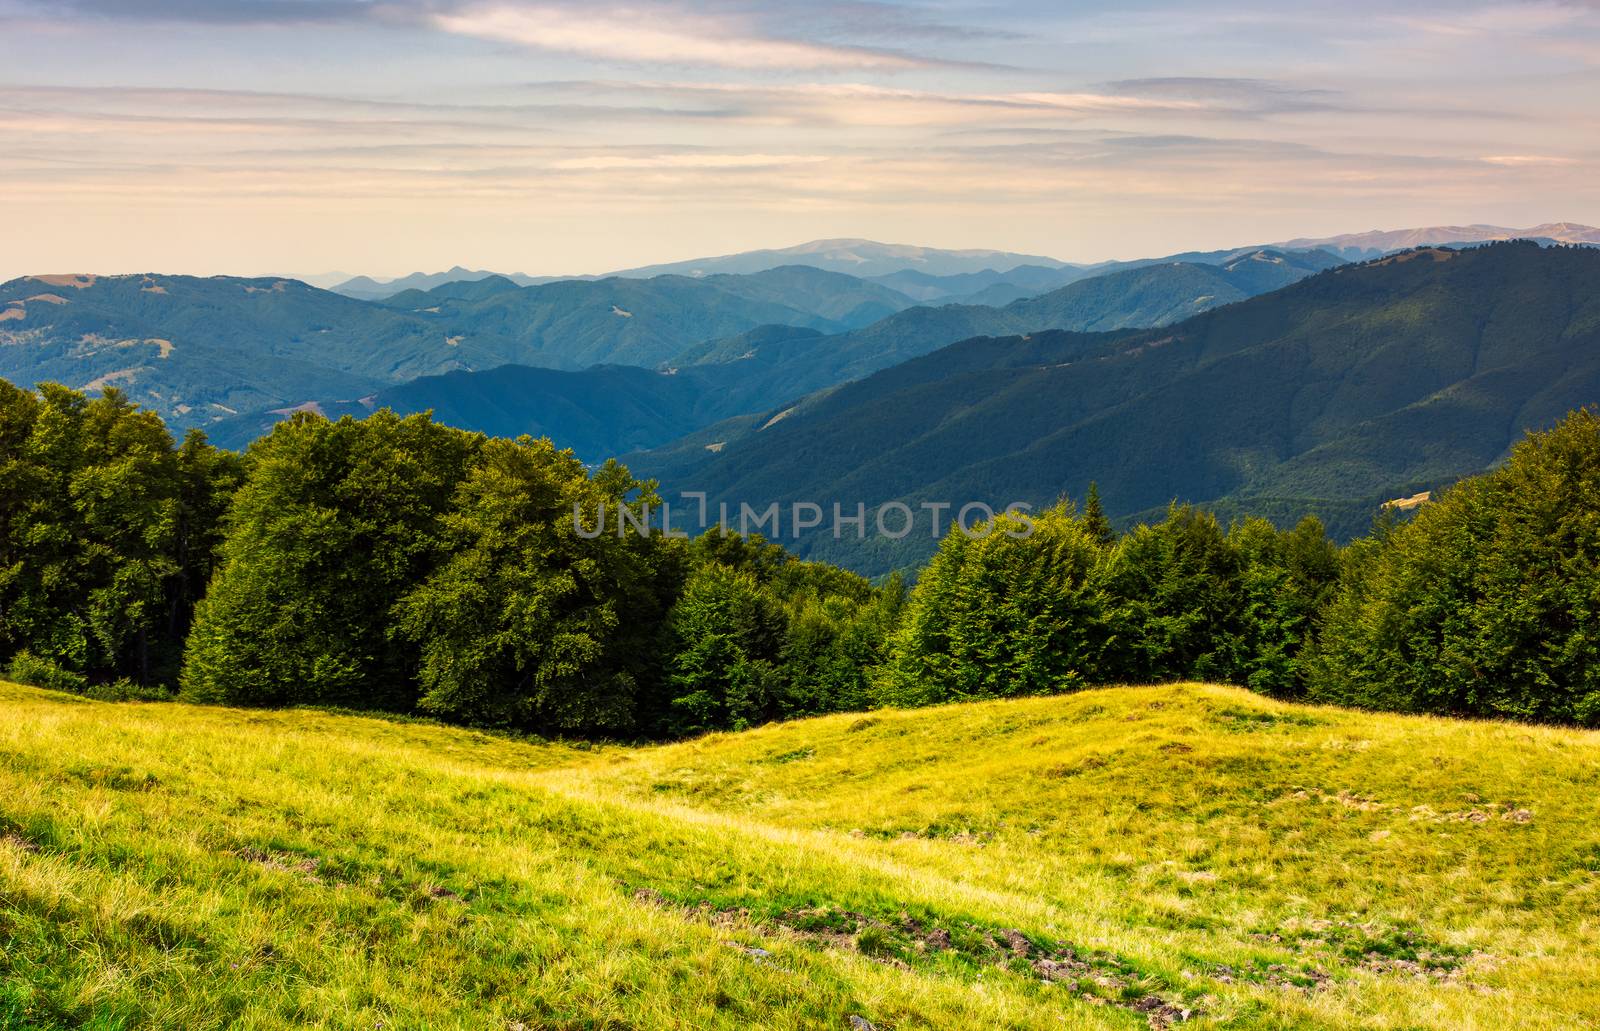 forest on a grassy meadow in mountains. beautiful summer landscape with Krasna mountain in the far distance under the blue sky with some clouds